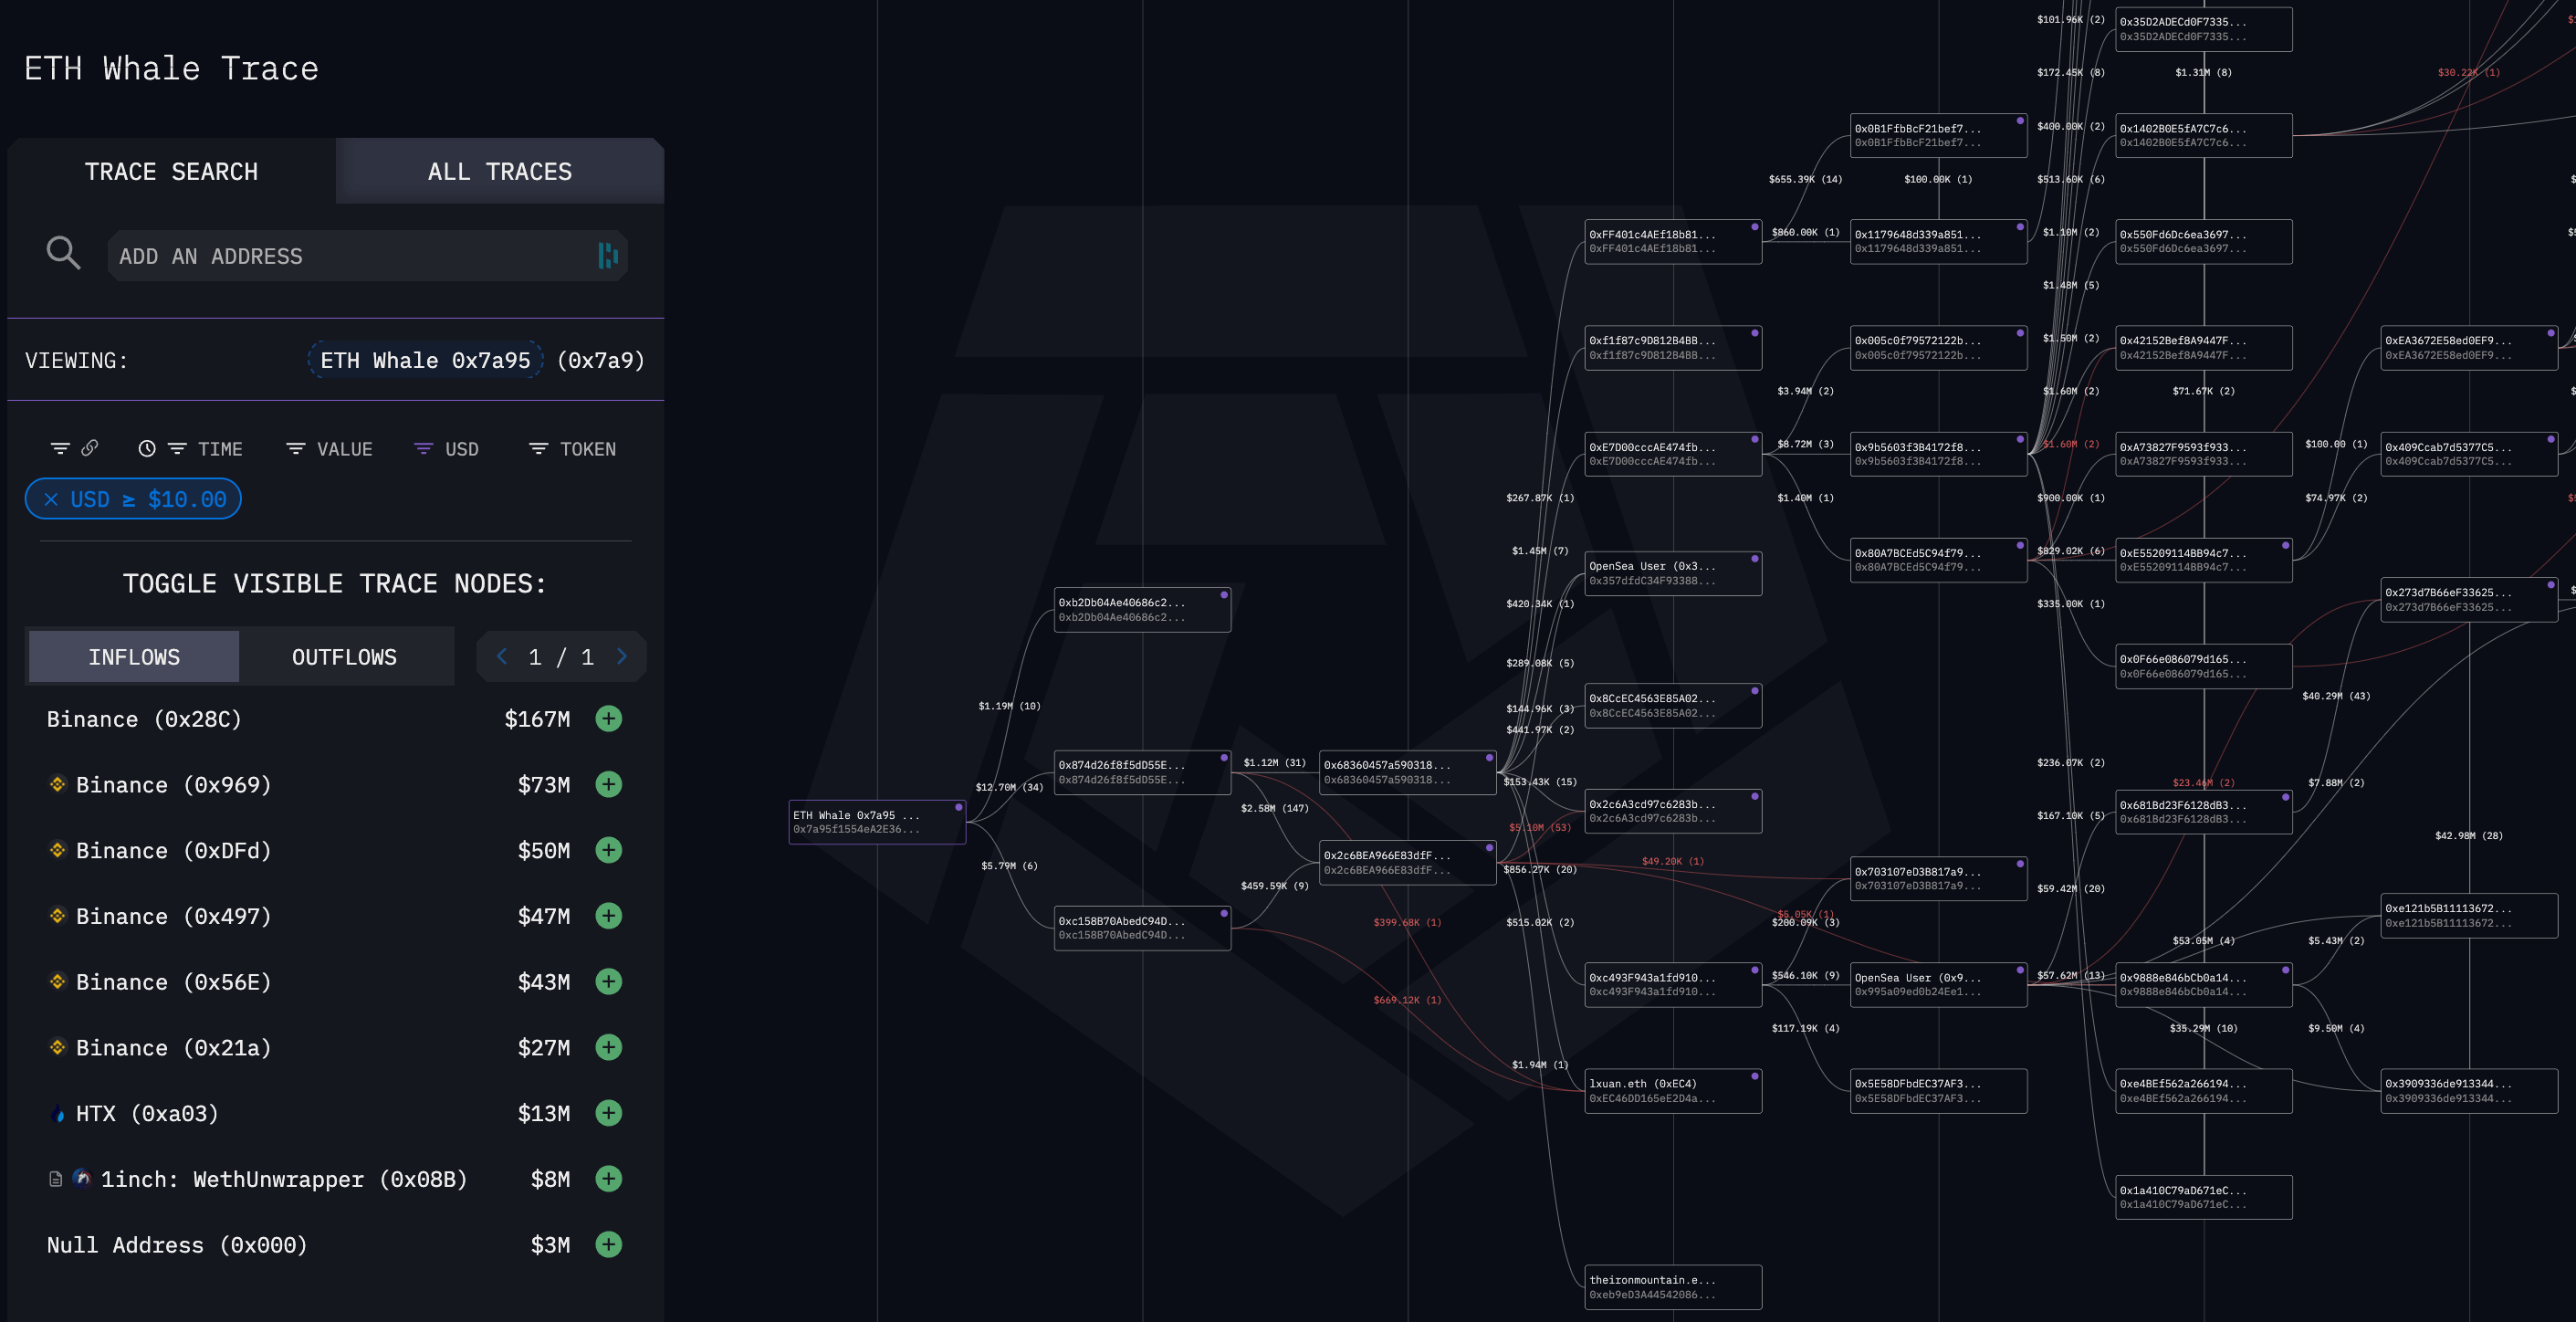 Entity tracing for 0x7a95 from Arkham Intelligence